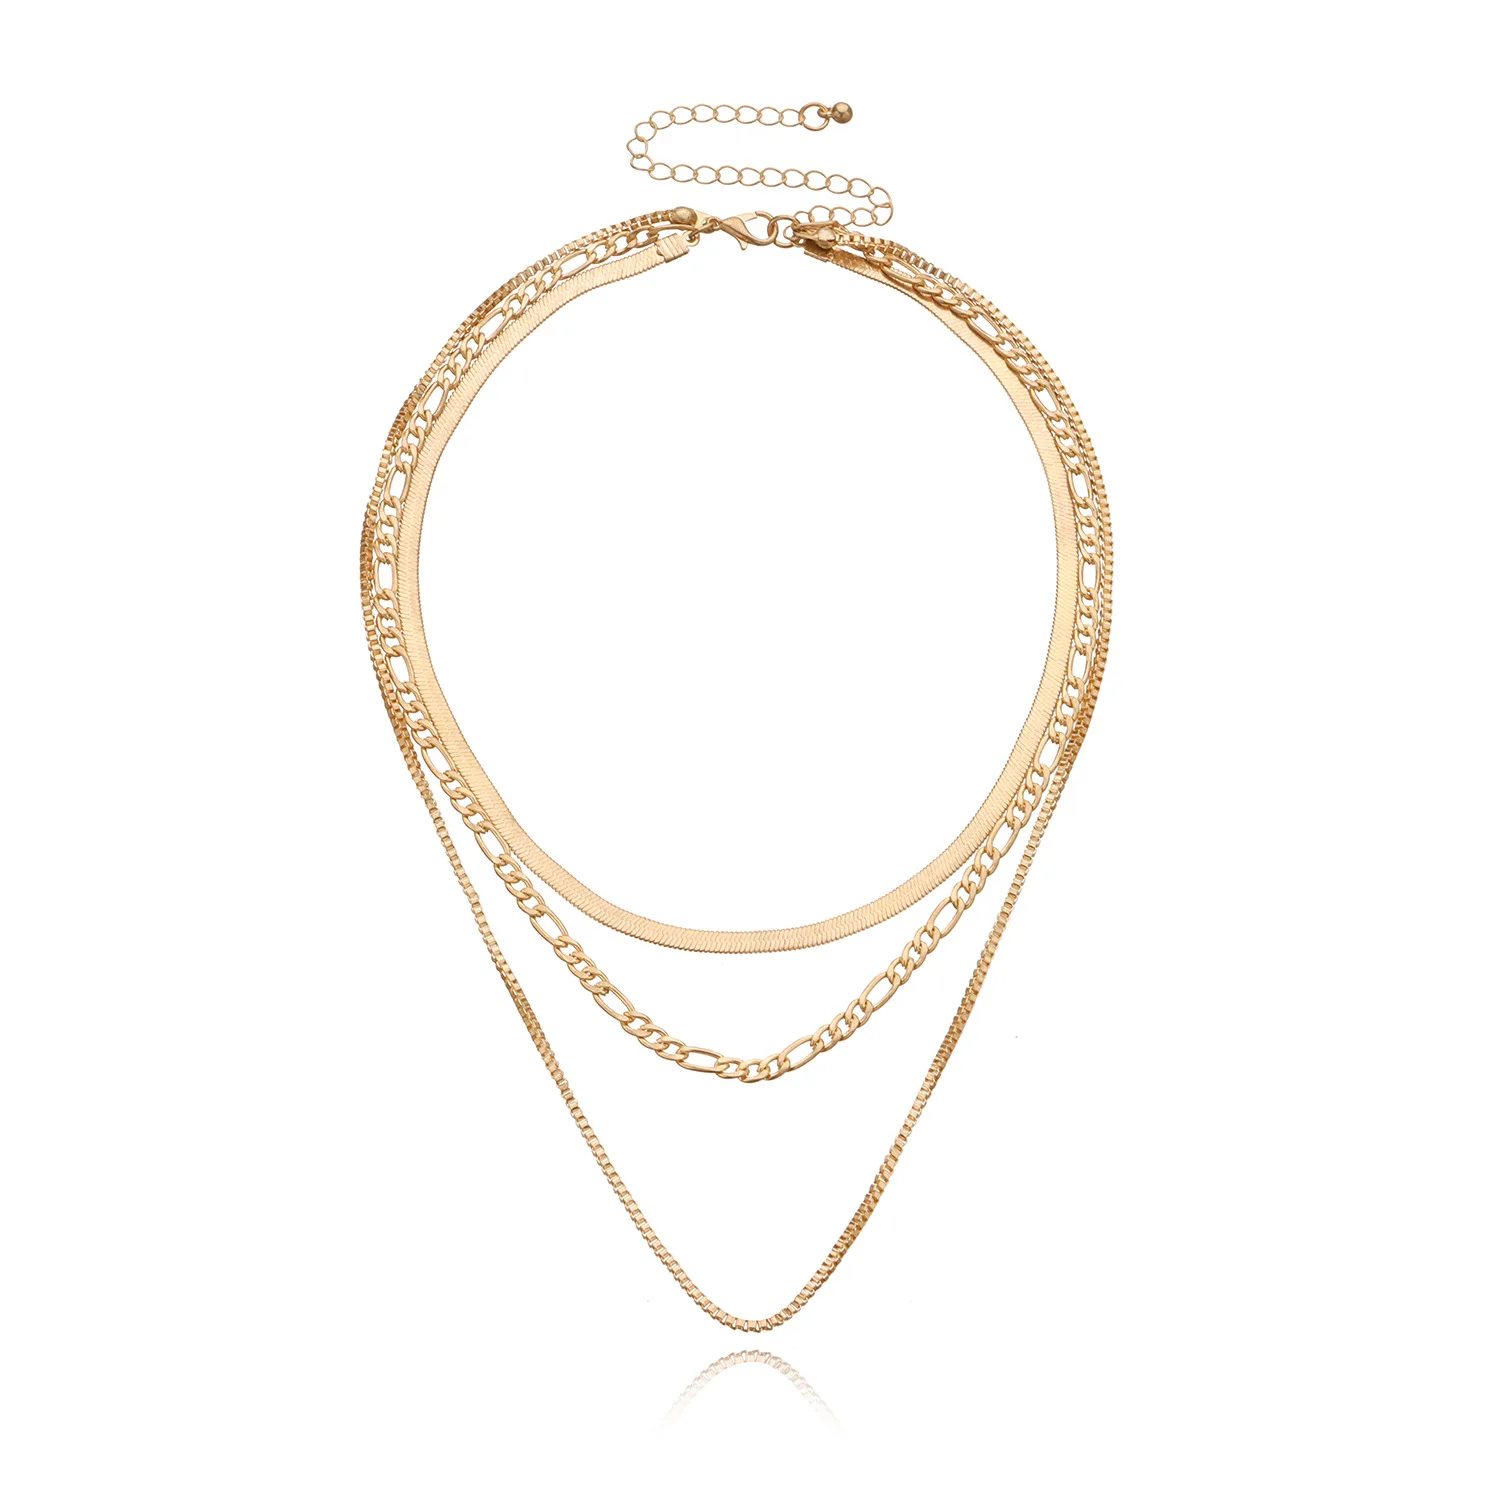 Get Gold Multi Layer Chain Necklace at ₹ 599